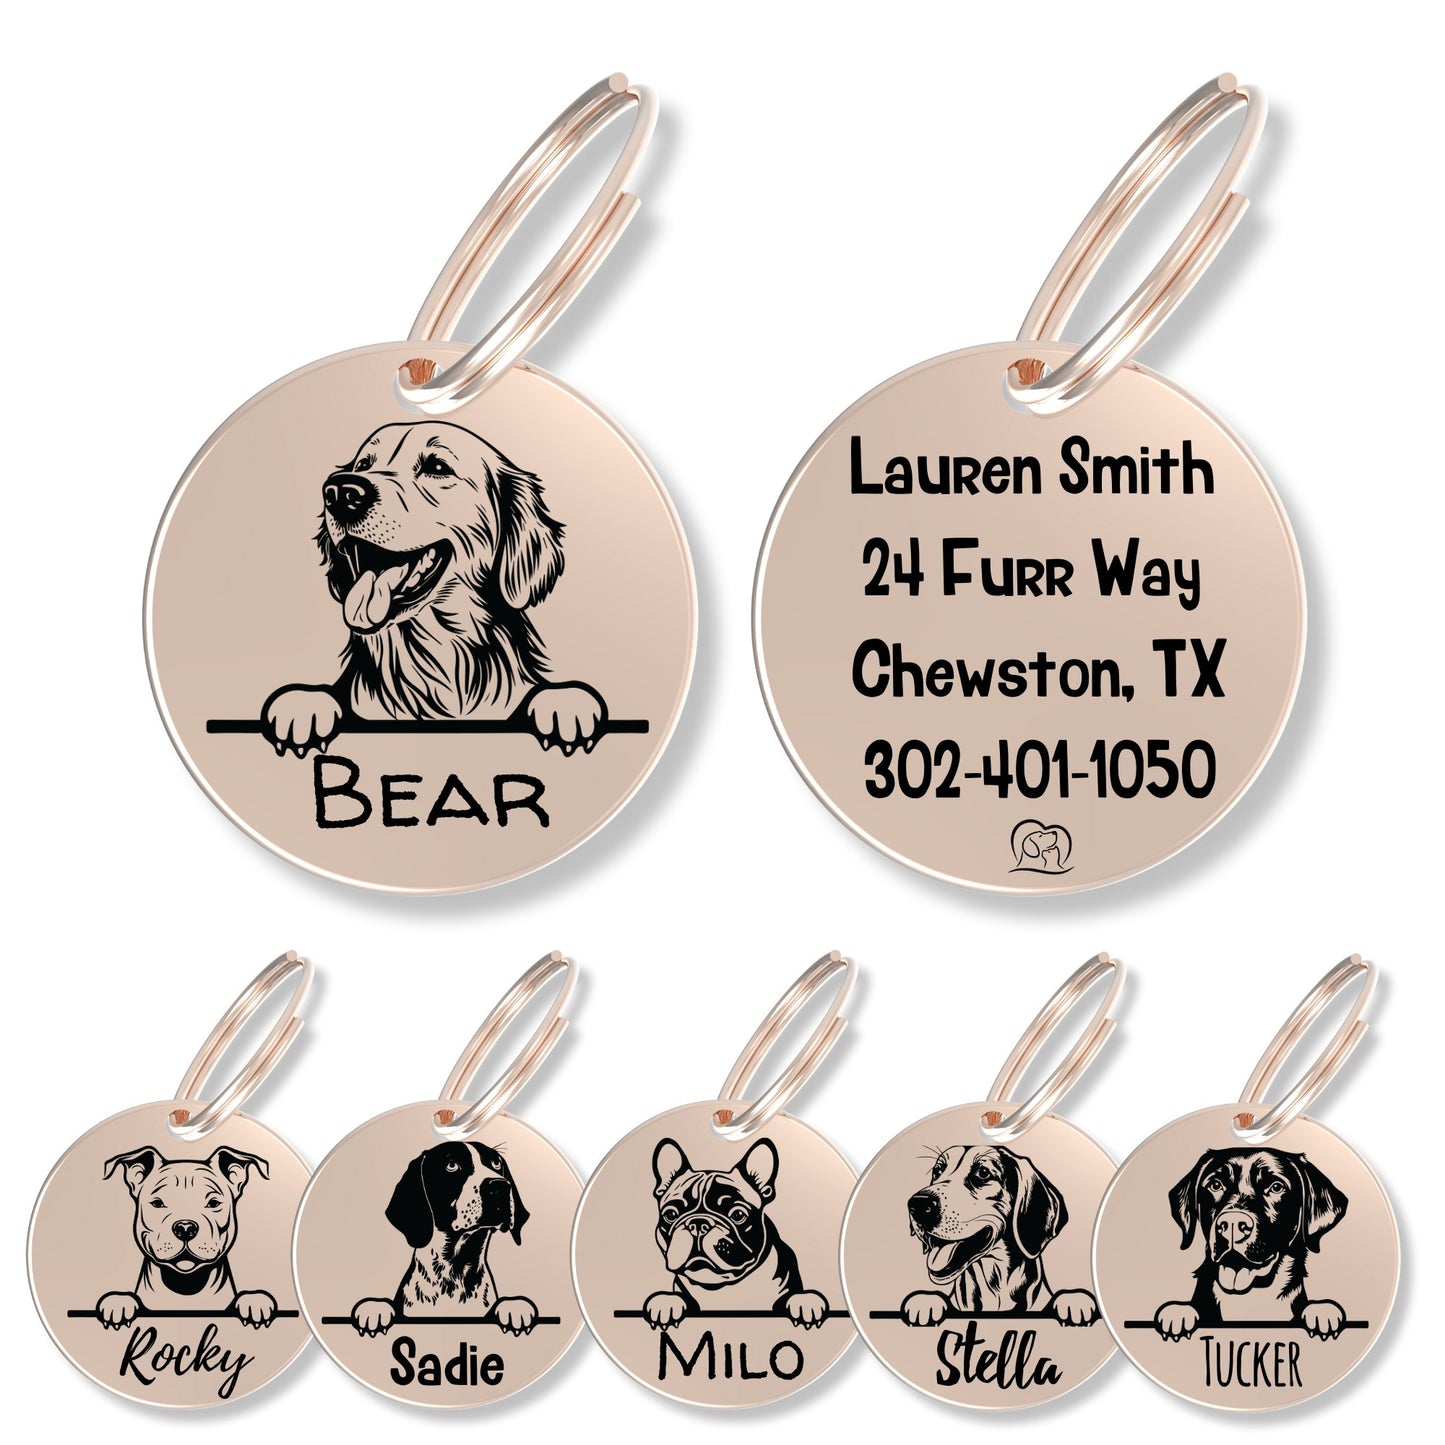 Breed Dog Tag - Personalized Breed Dog Tag (Golden Retriever)